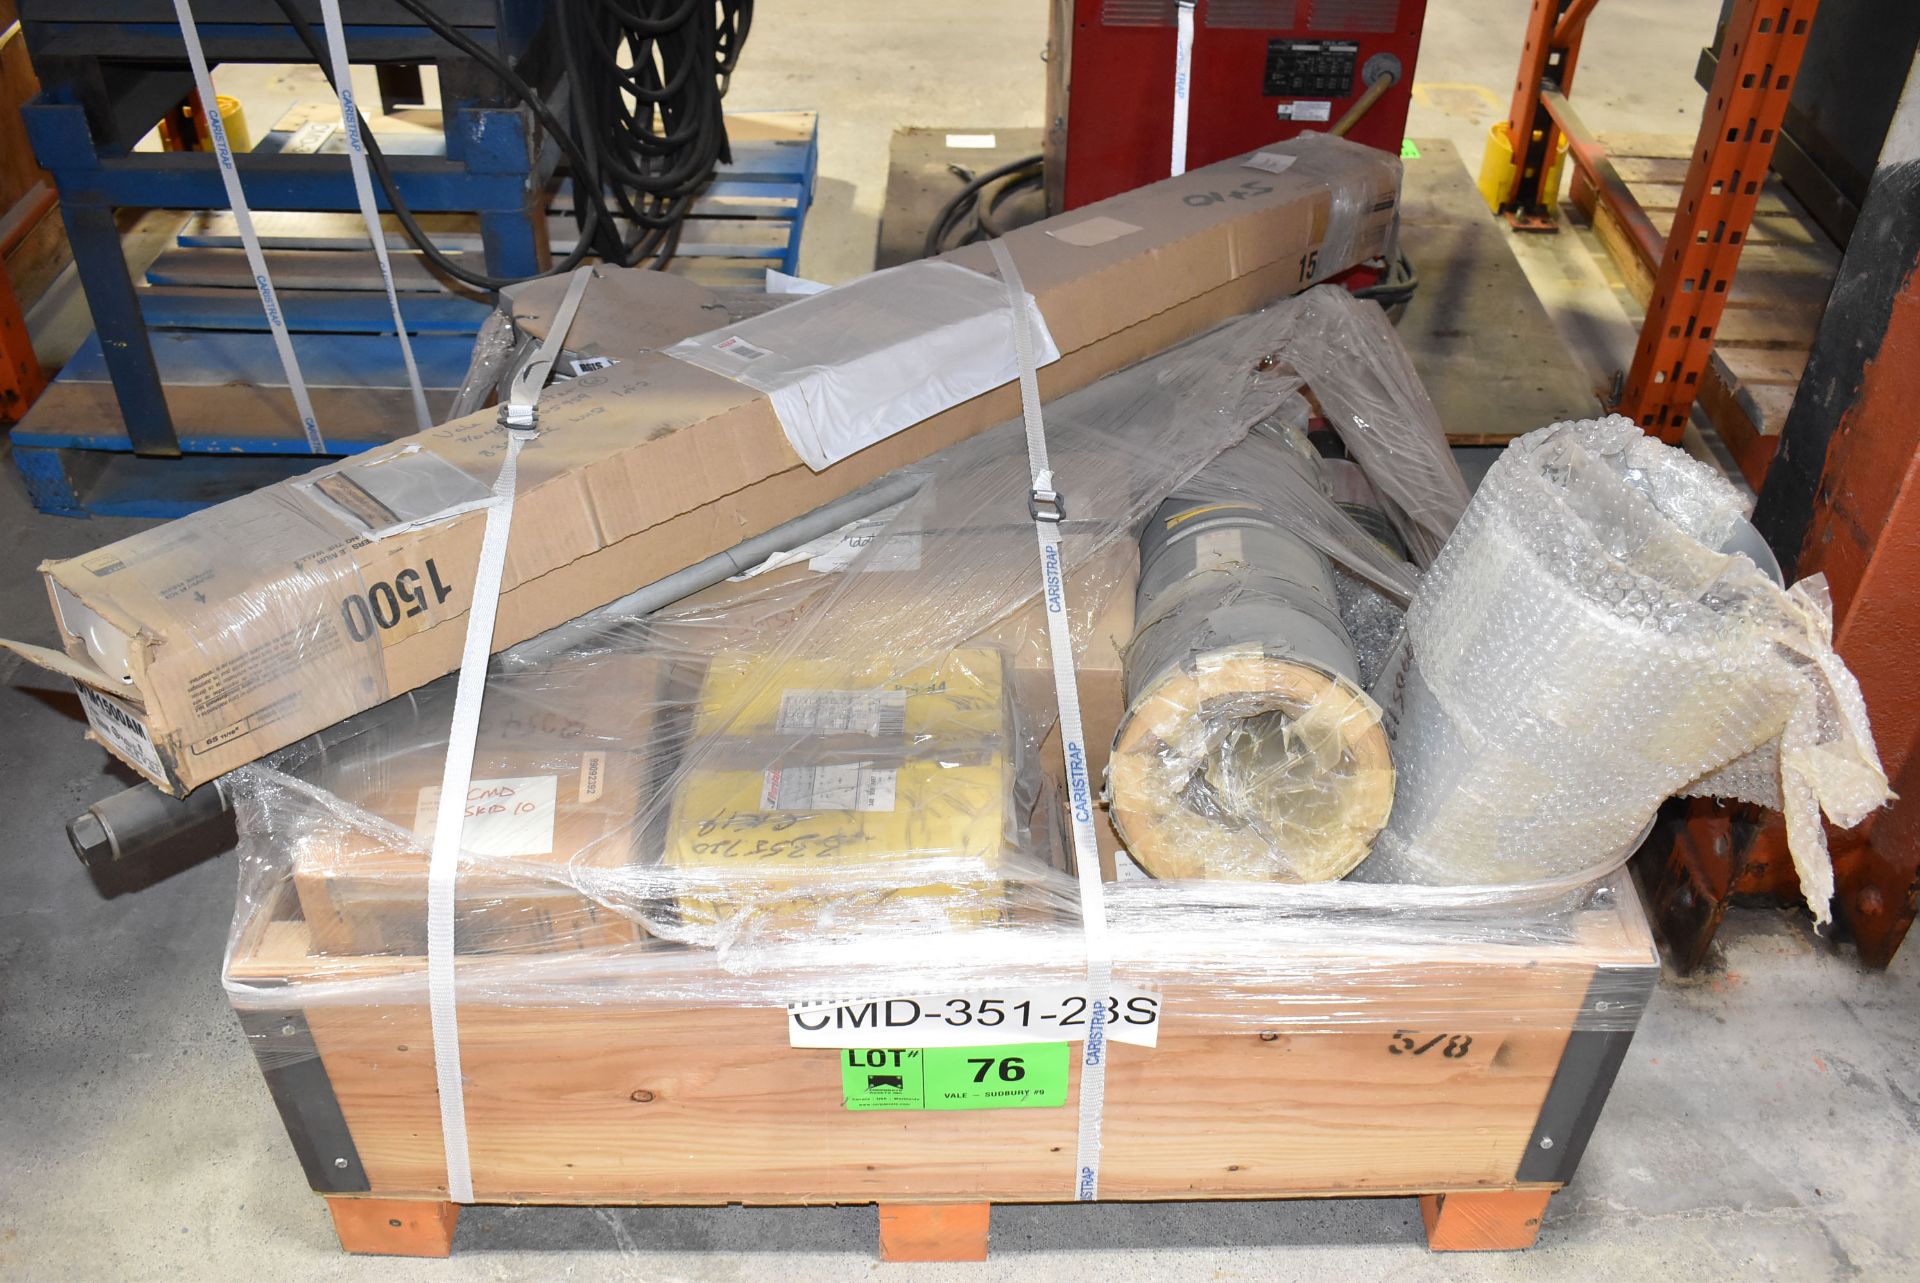 LOT/ CRATE WITH SPARE PARTS CONSISTING OF SHAFTS, IMPELLERS, SPROCKETS, PULLEYS, PLUGS & BASEBOARD